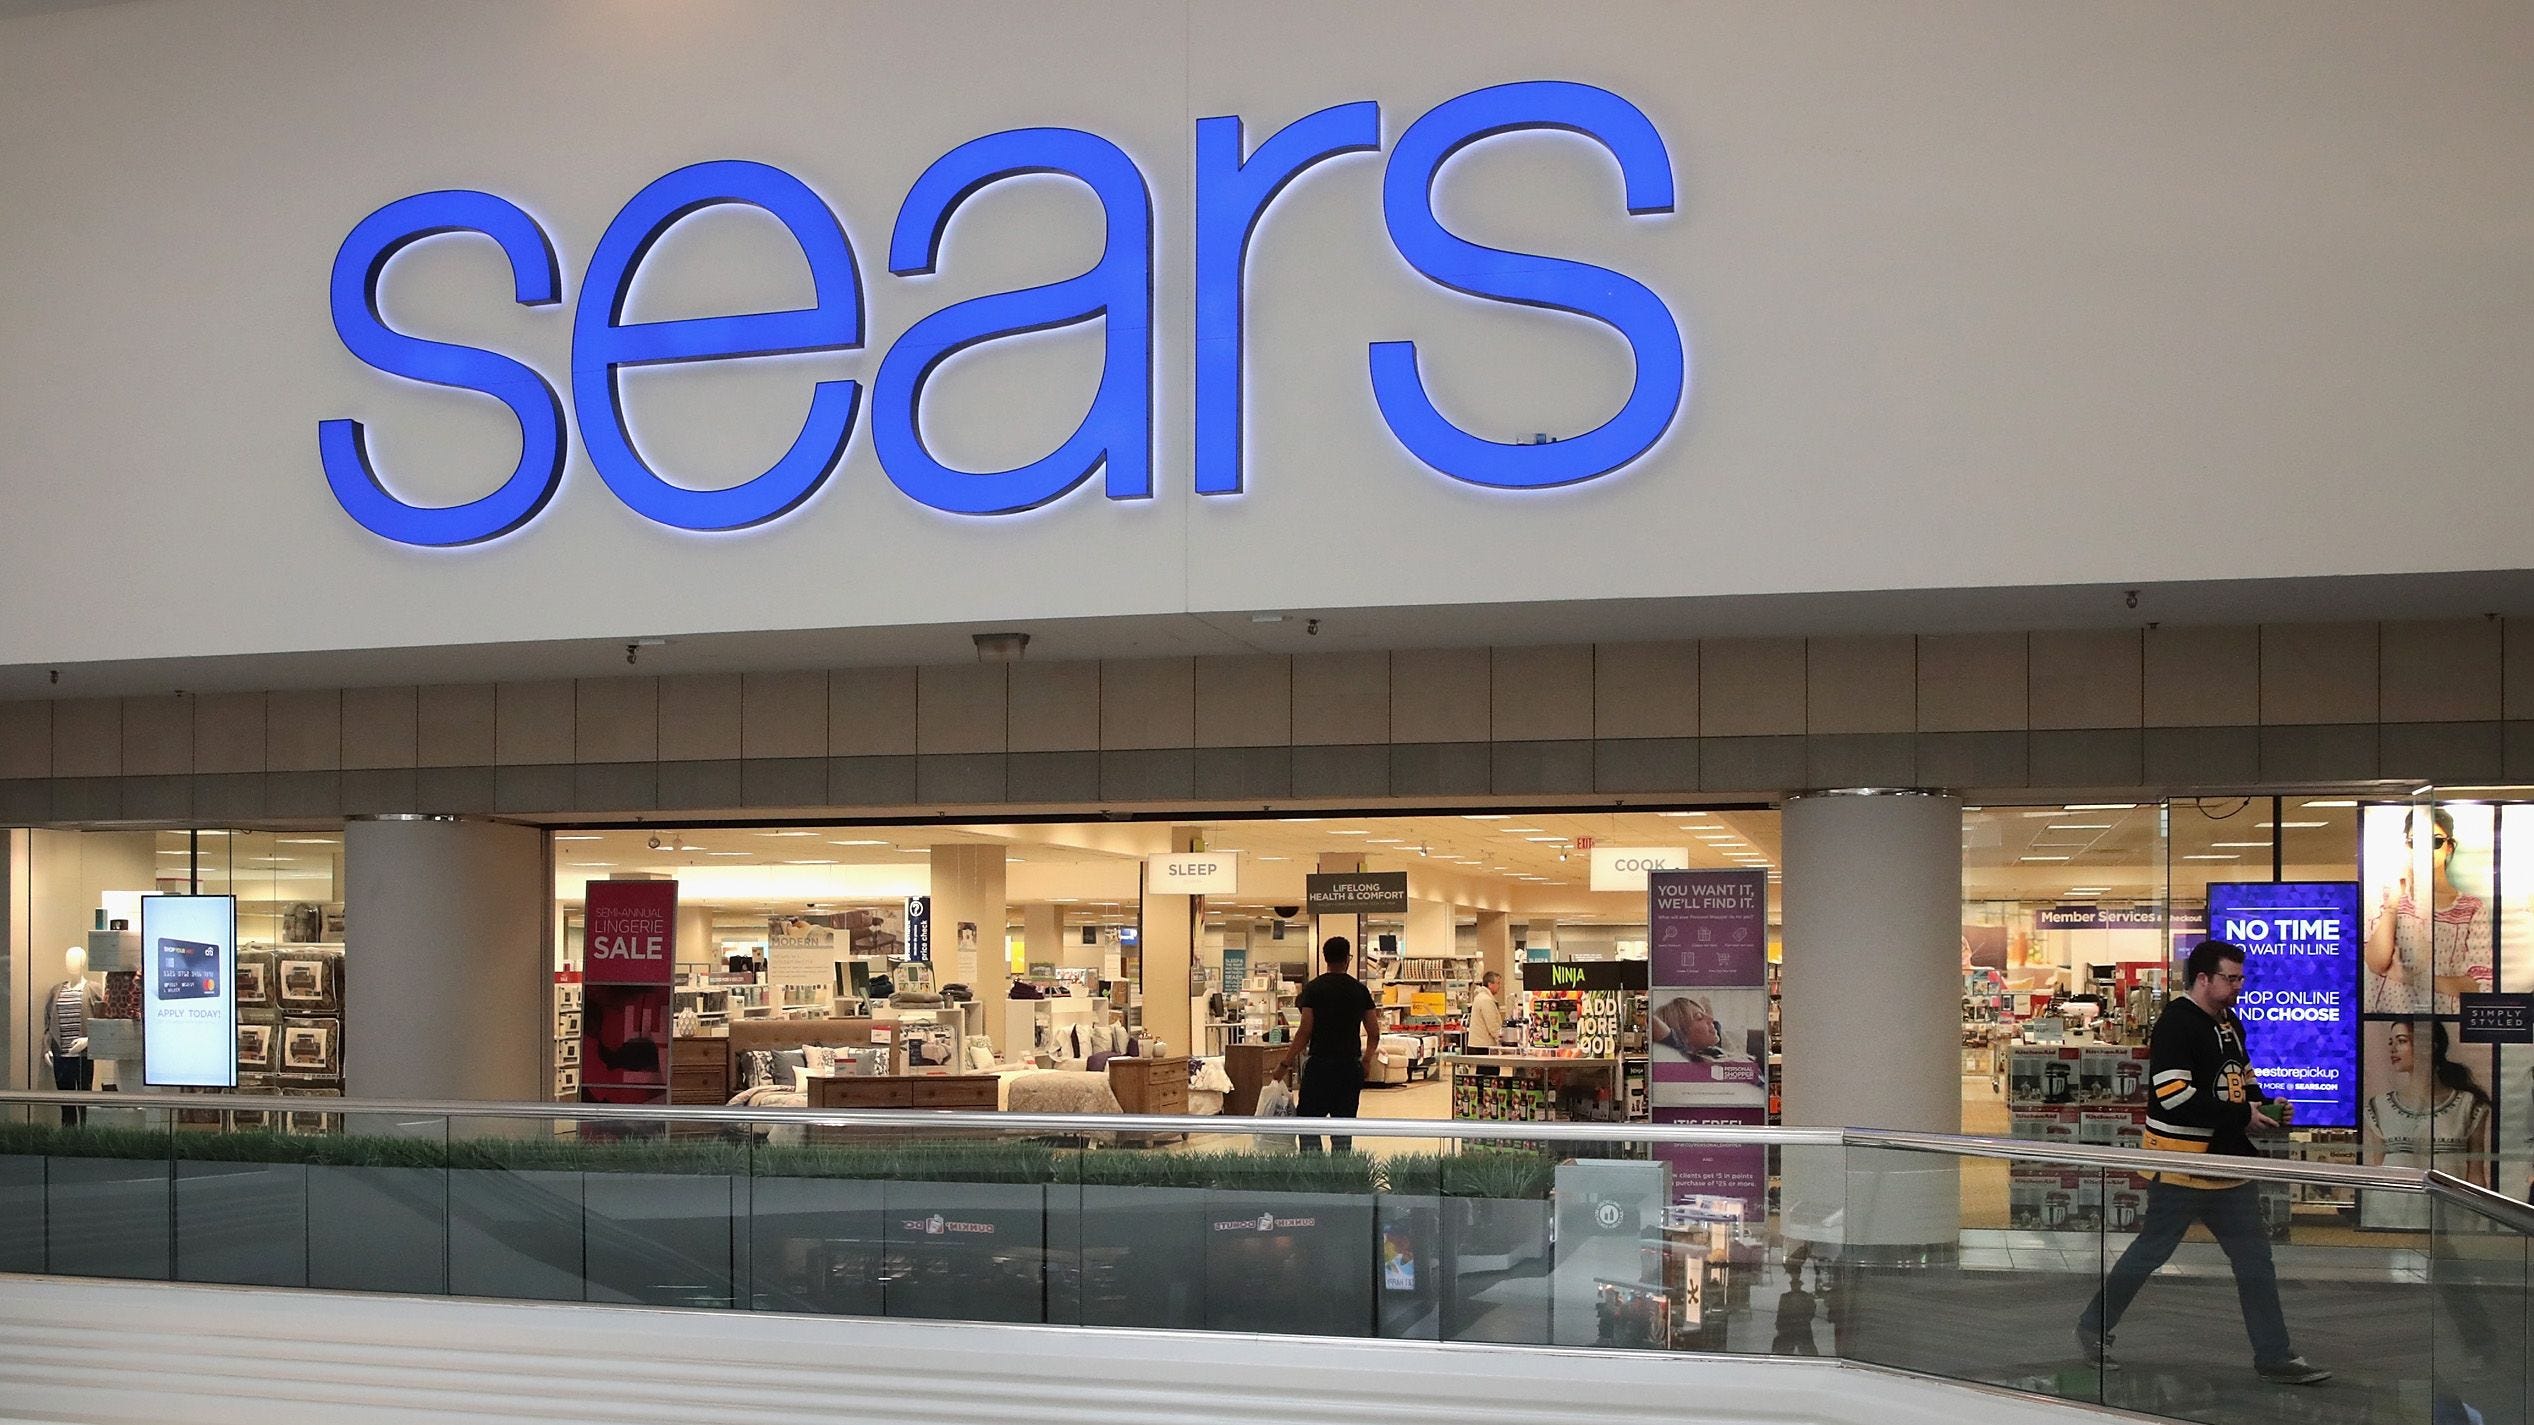 SEARS: Shop Sears for appliances, tools, clothing, mattresses & more. Great name brands like Kenmore, Craftsman Tools, Serta, Diehard and many others.